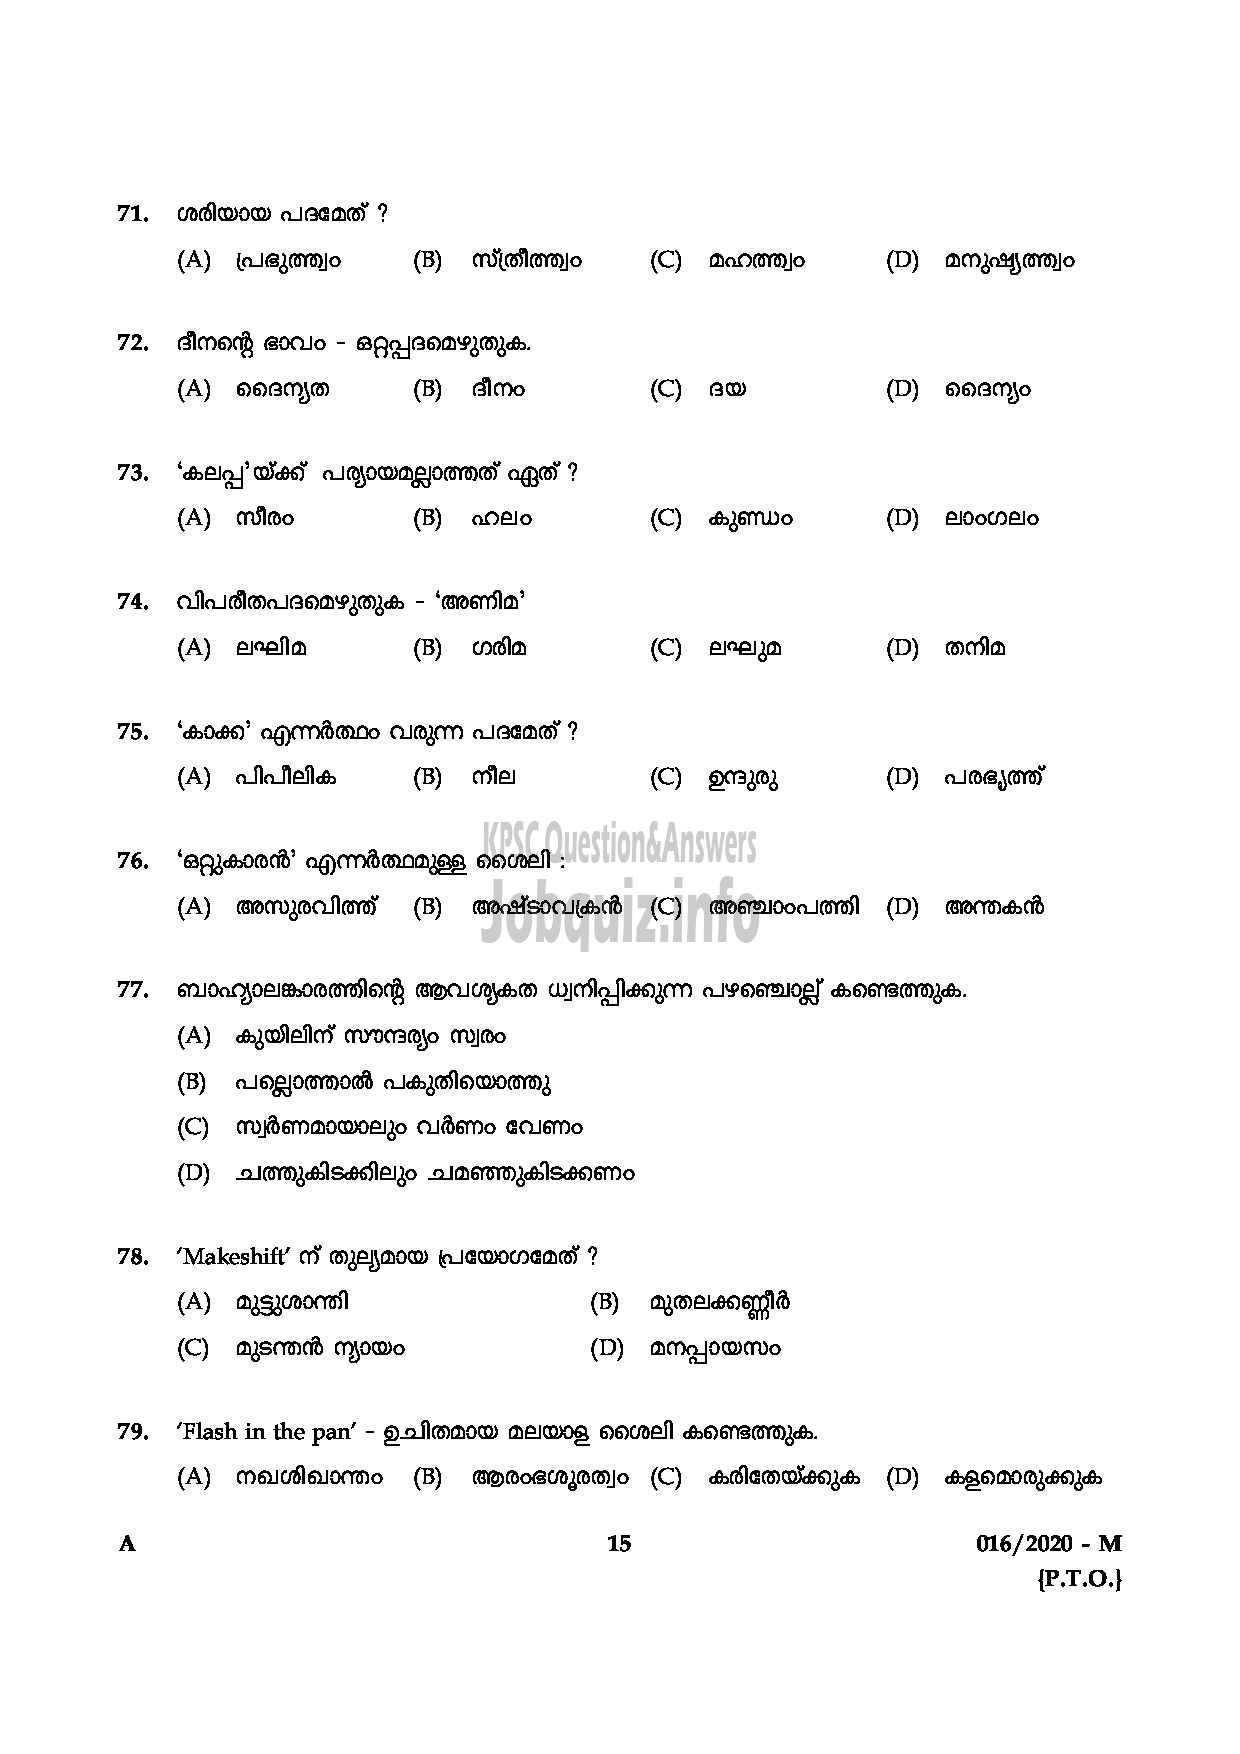 Kerala PSC Question Paper - KAS OFFICER (JUNIOR TIME SCALE) TRAINEE KERALA ADMINISTRATIVE SERVICE-15